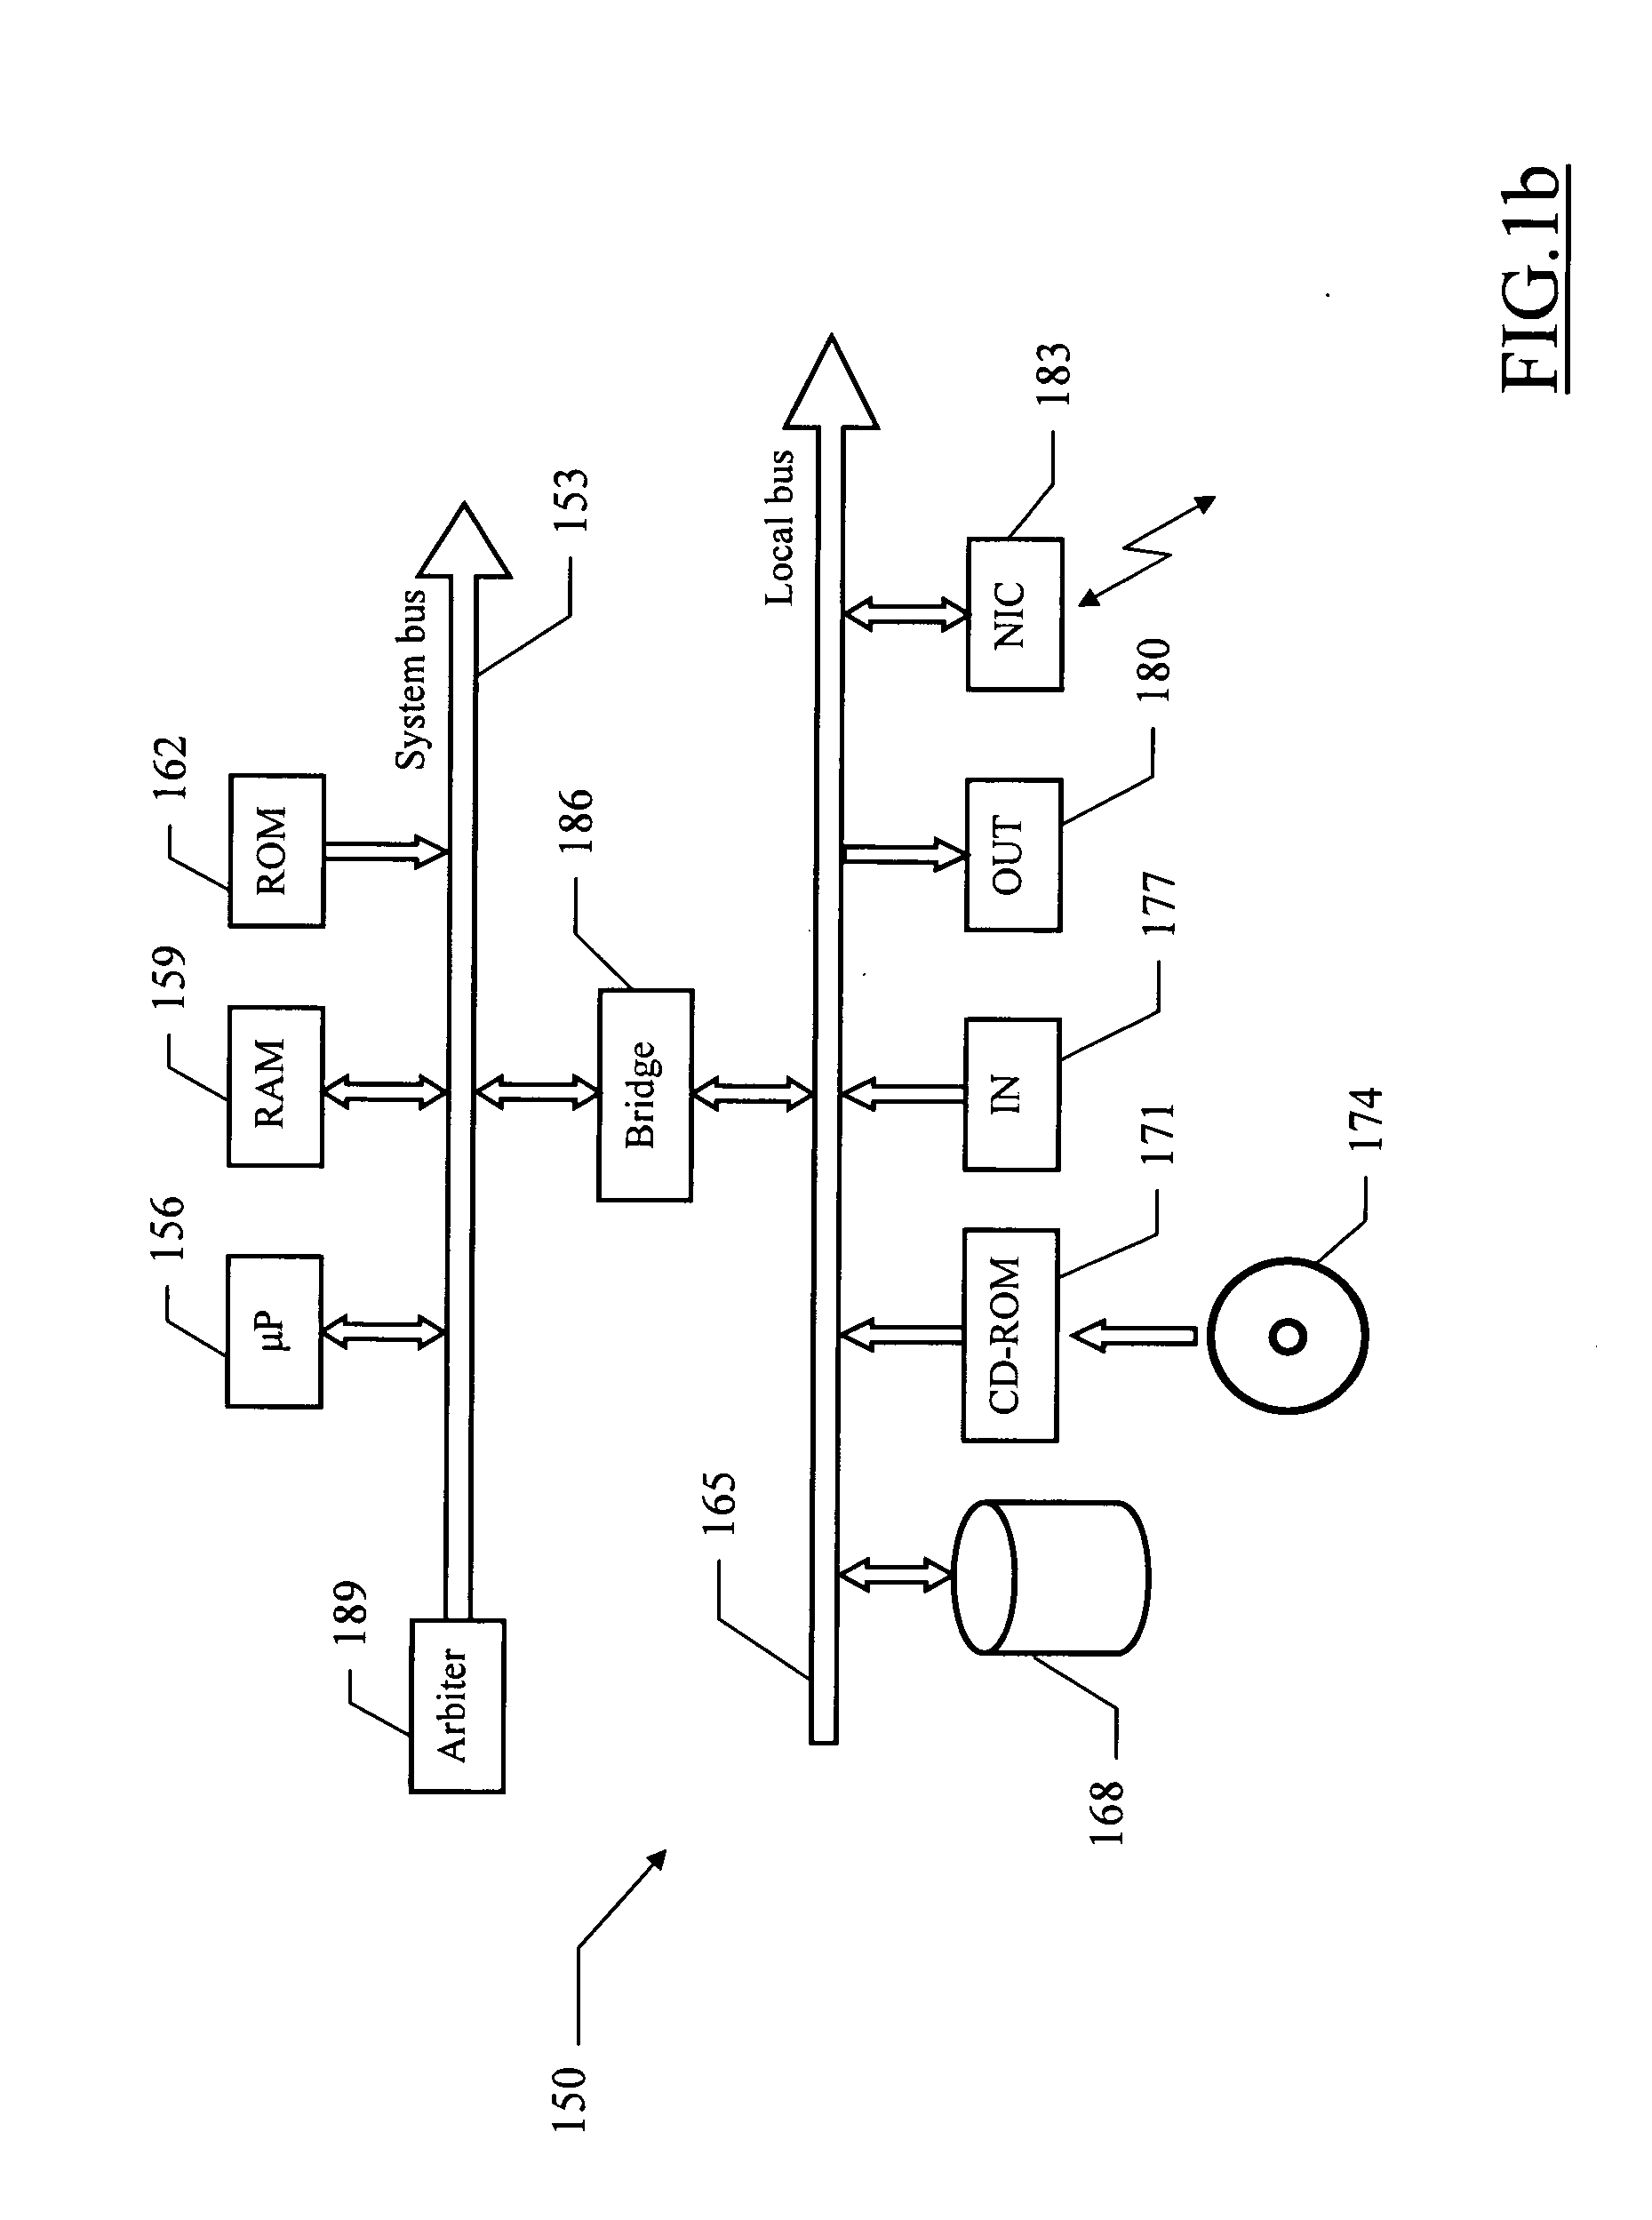 Method and system for testing distributed software applications